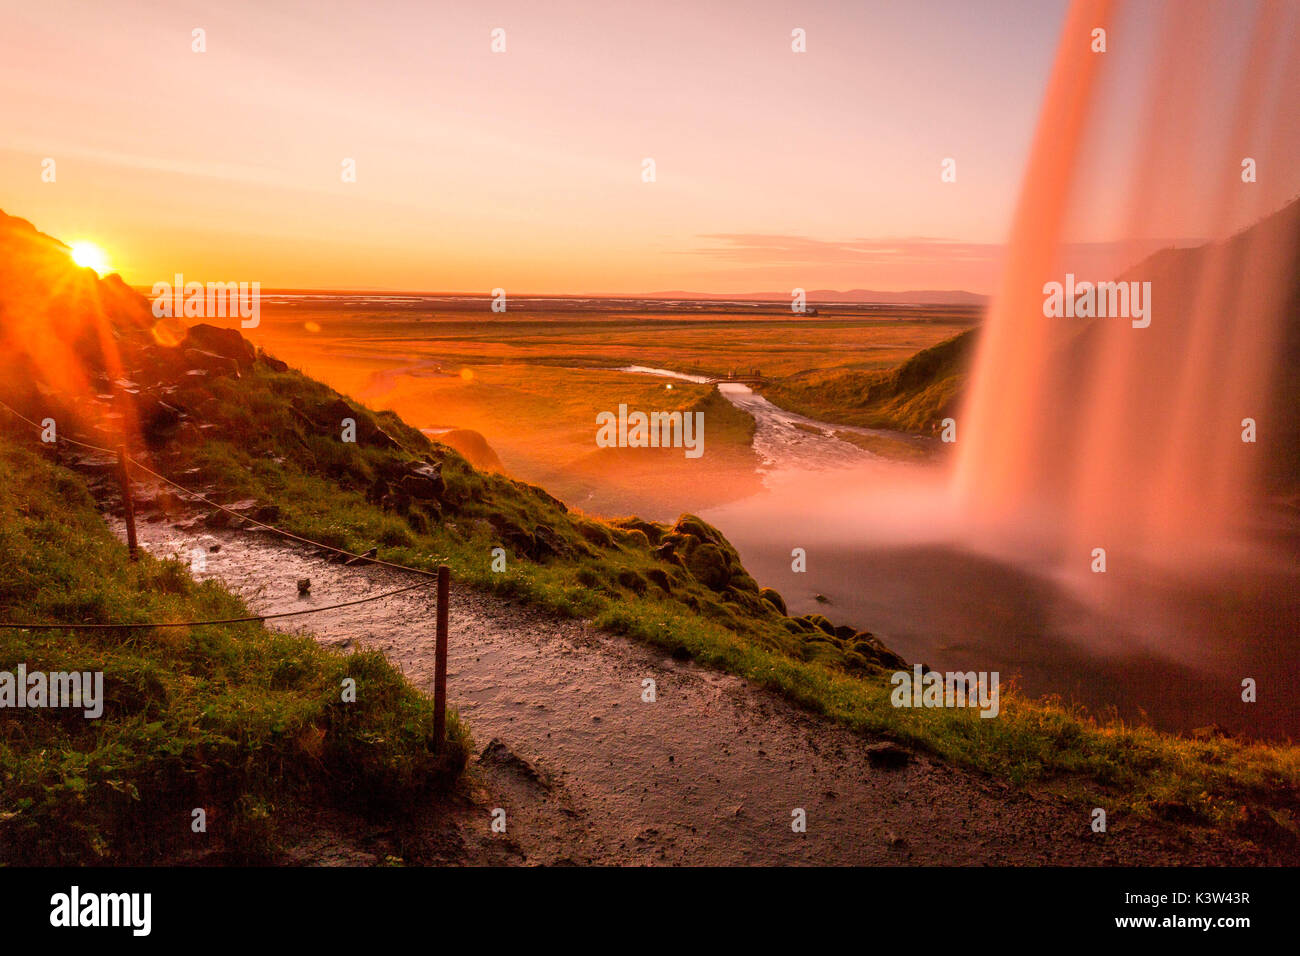 Iceland landscape, Seljalandsfoss waterfall at sunset, picture taken from behind the fall with sunburst Stock Photo